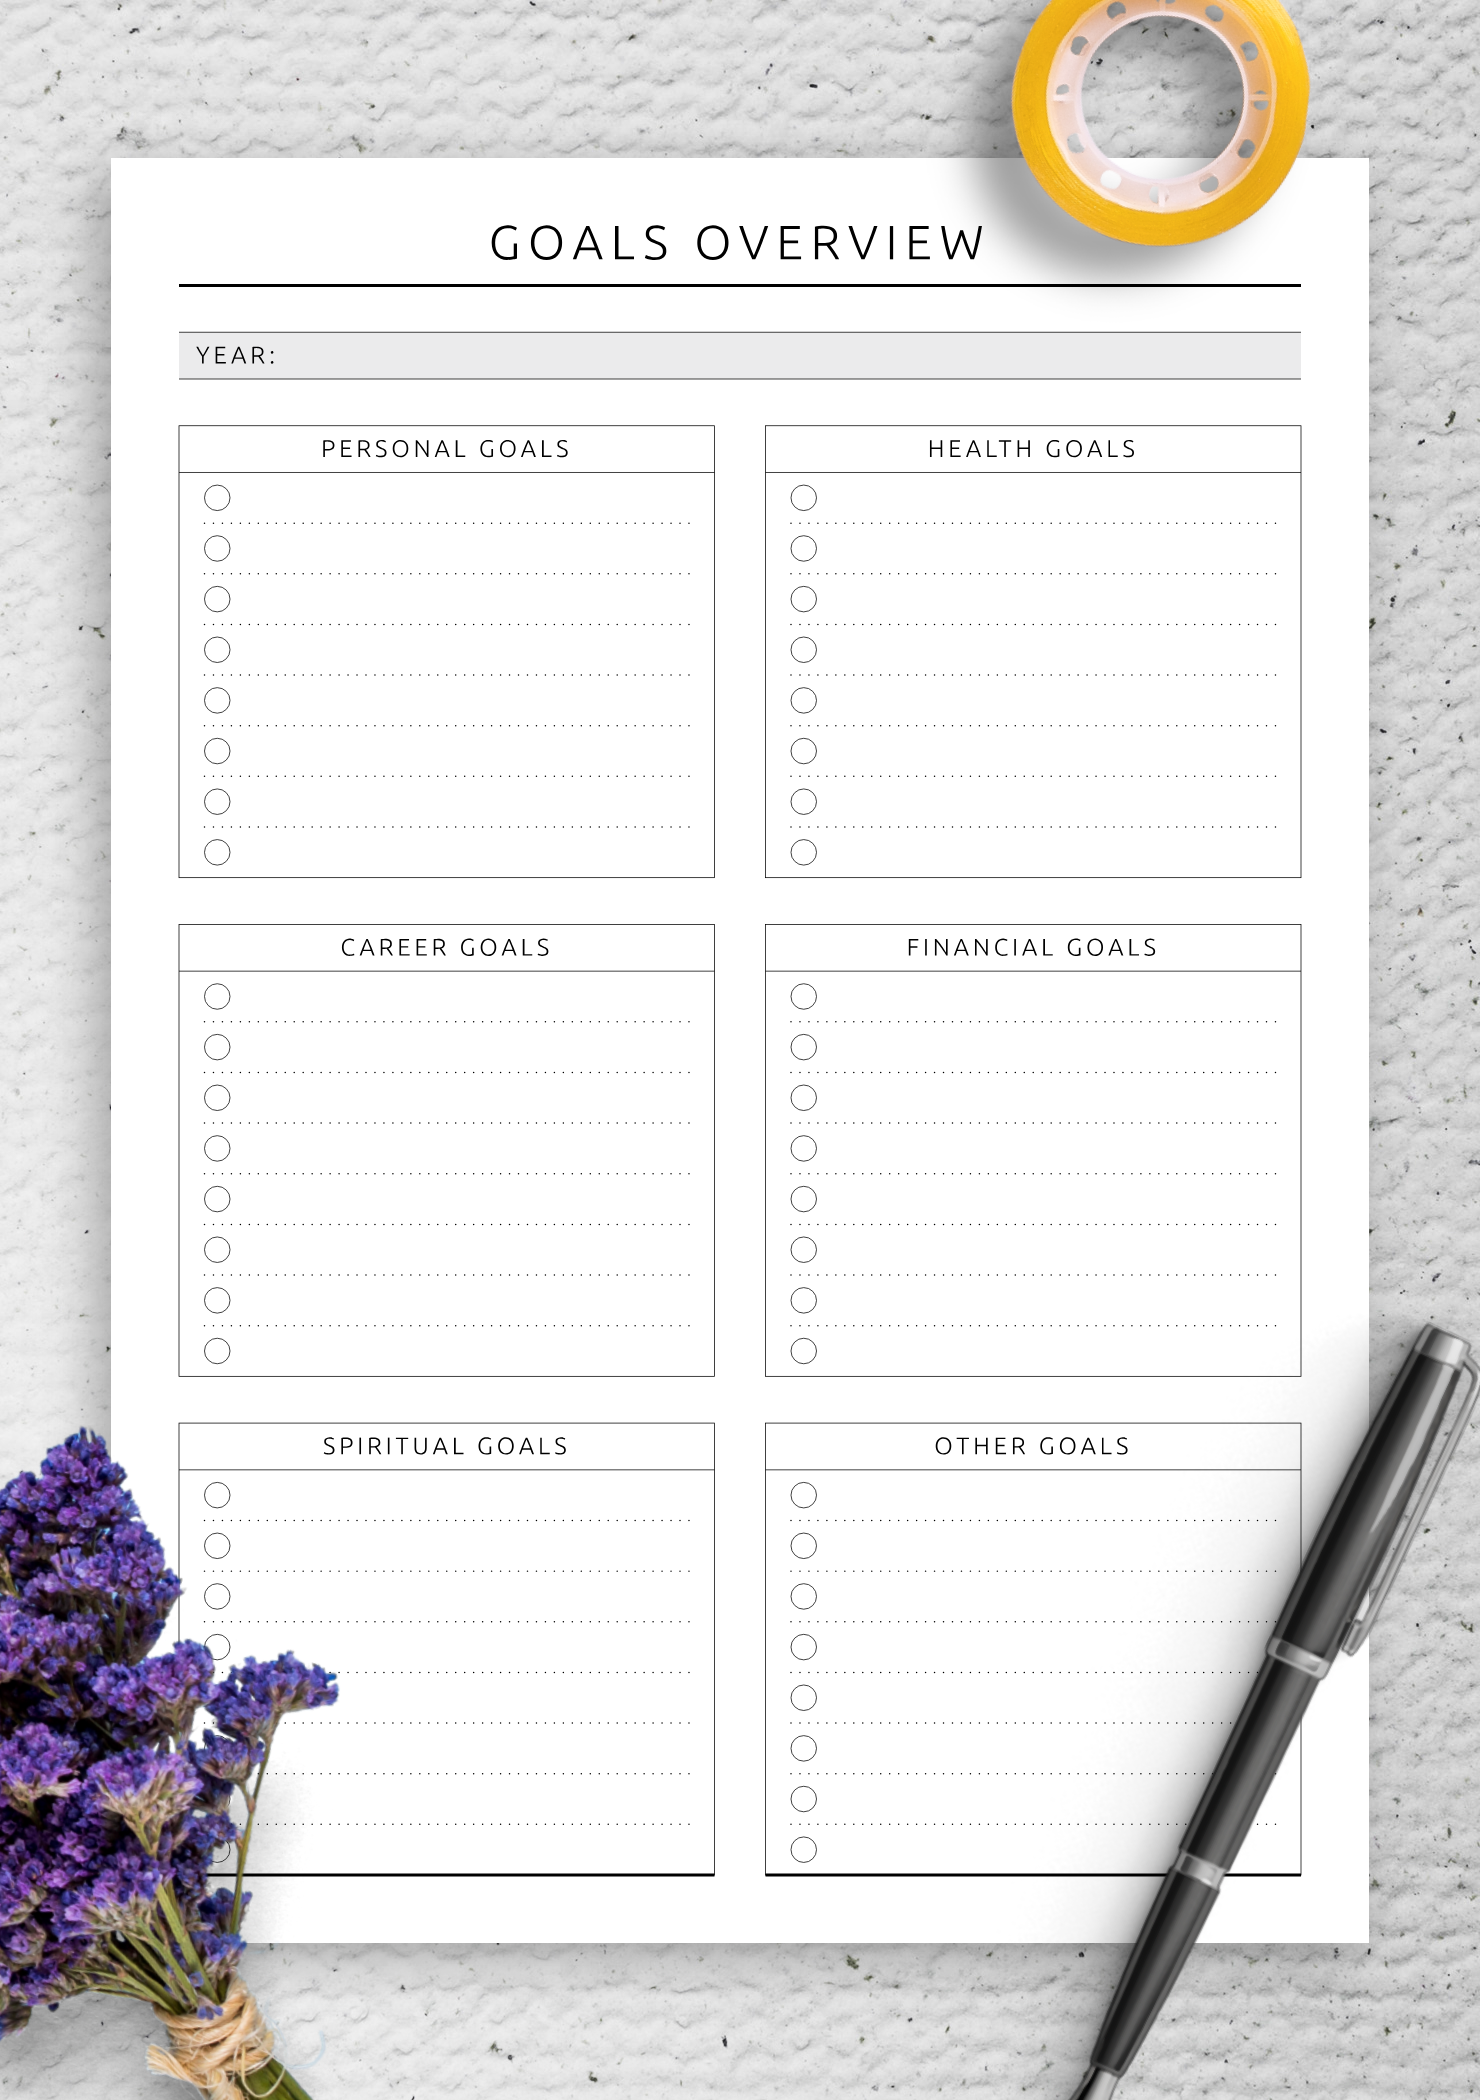 yearly-goals-overview-colored-design-template-printable-pdf